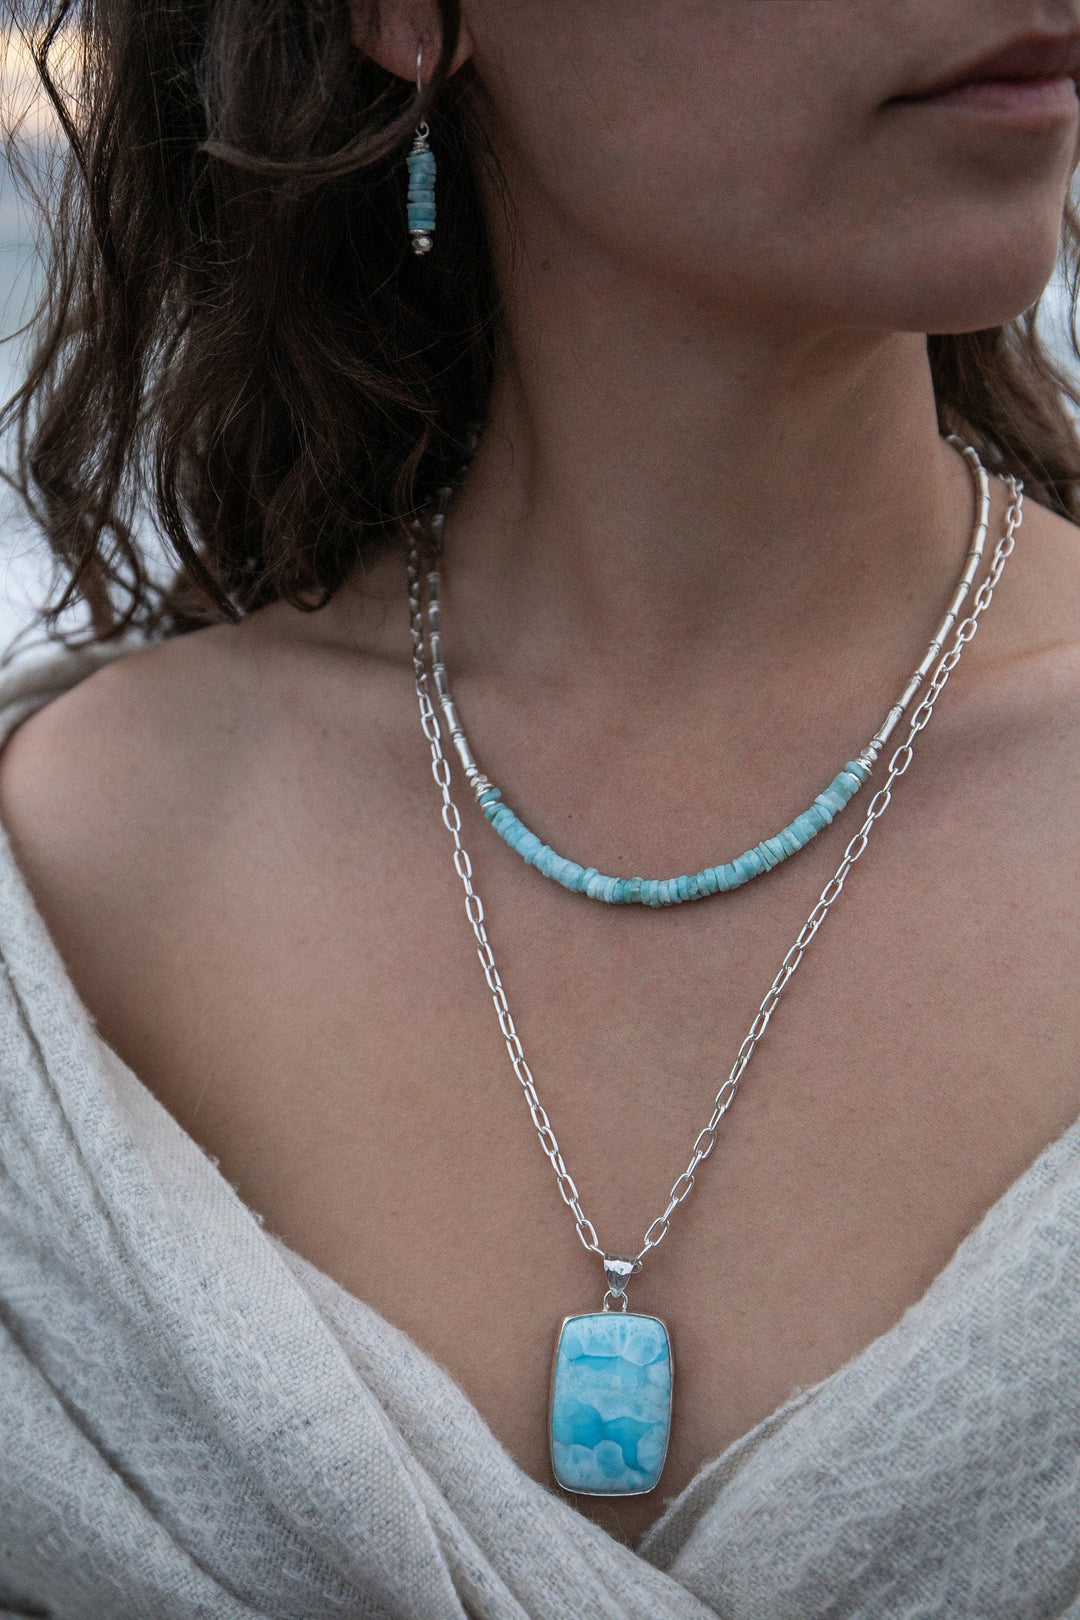 Beaded Larimar Necklace with 98% Thai Hill Tribe Silver Beads